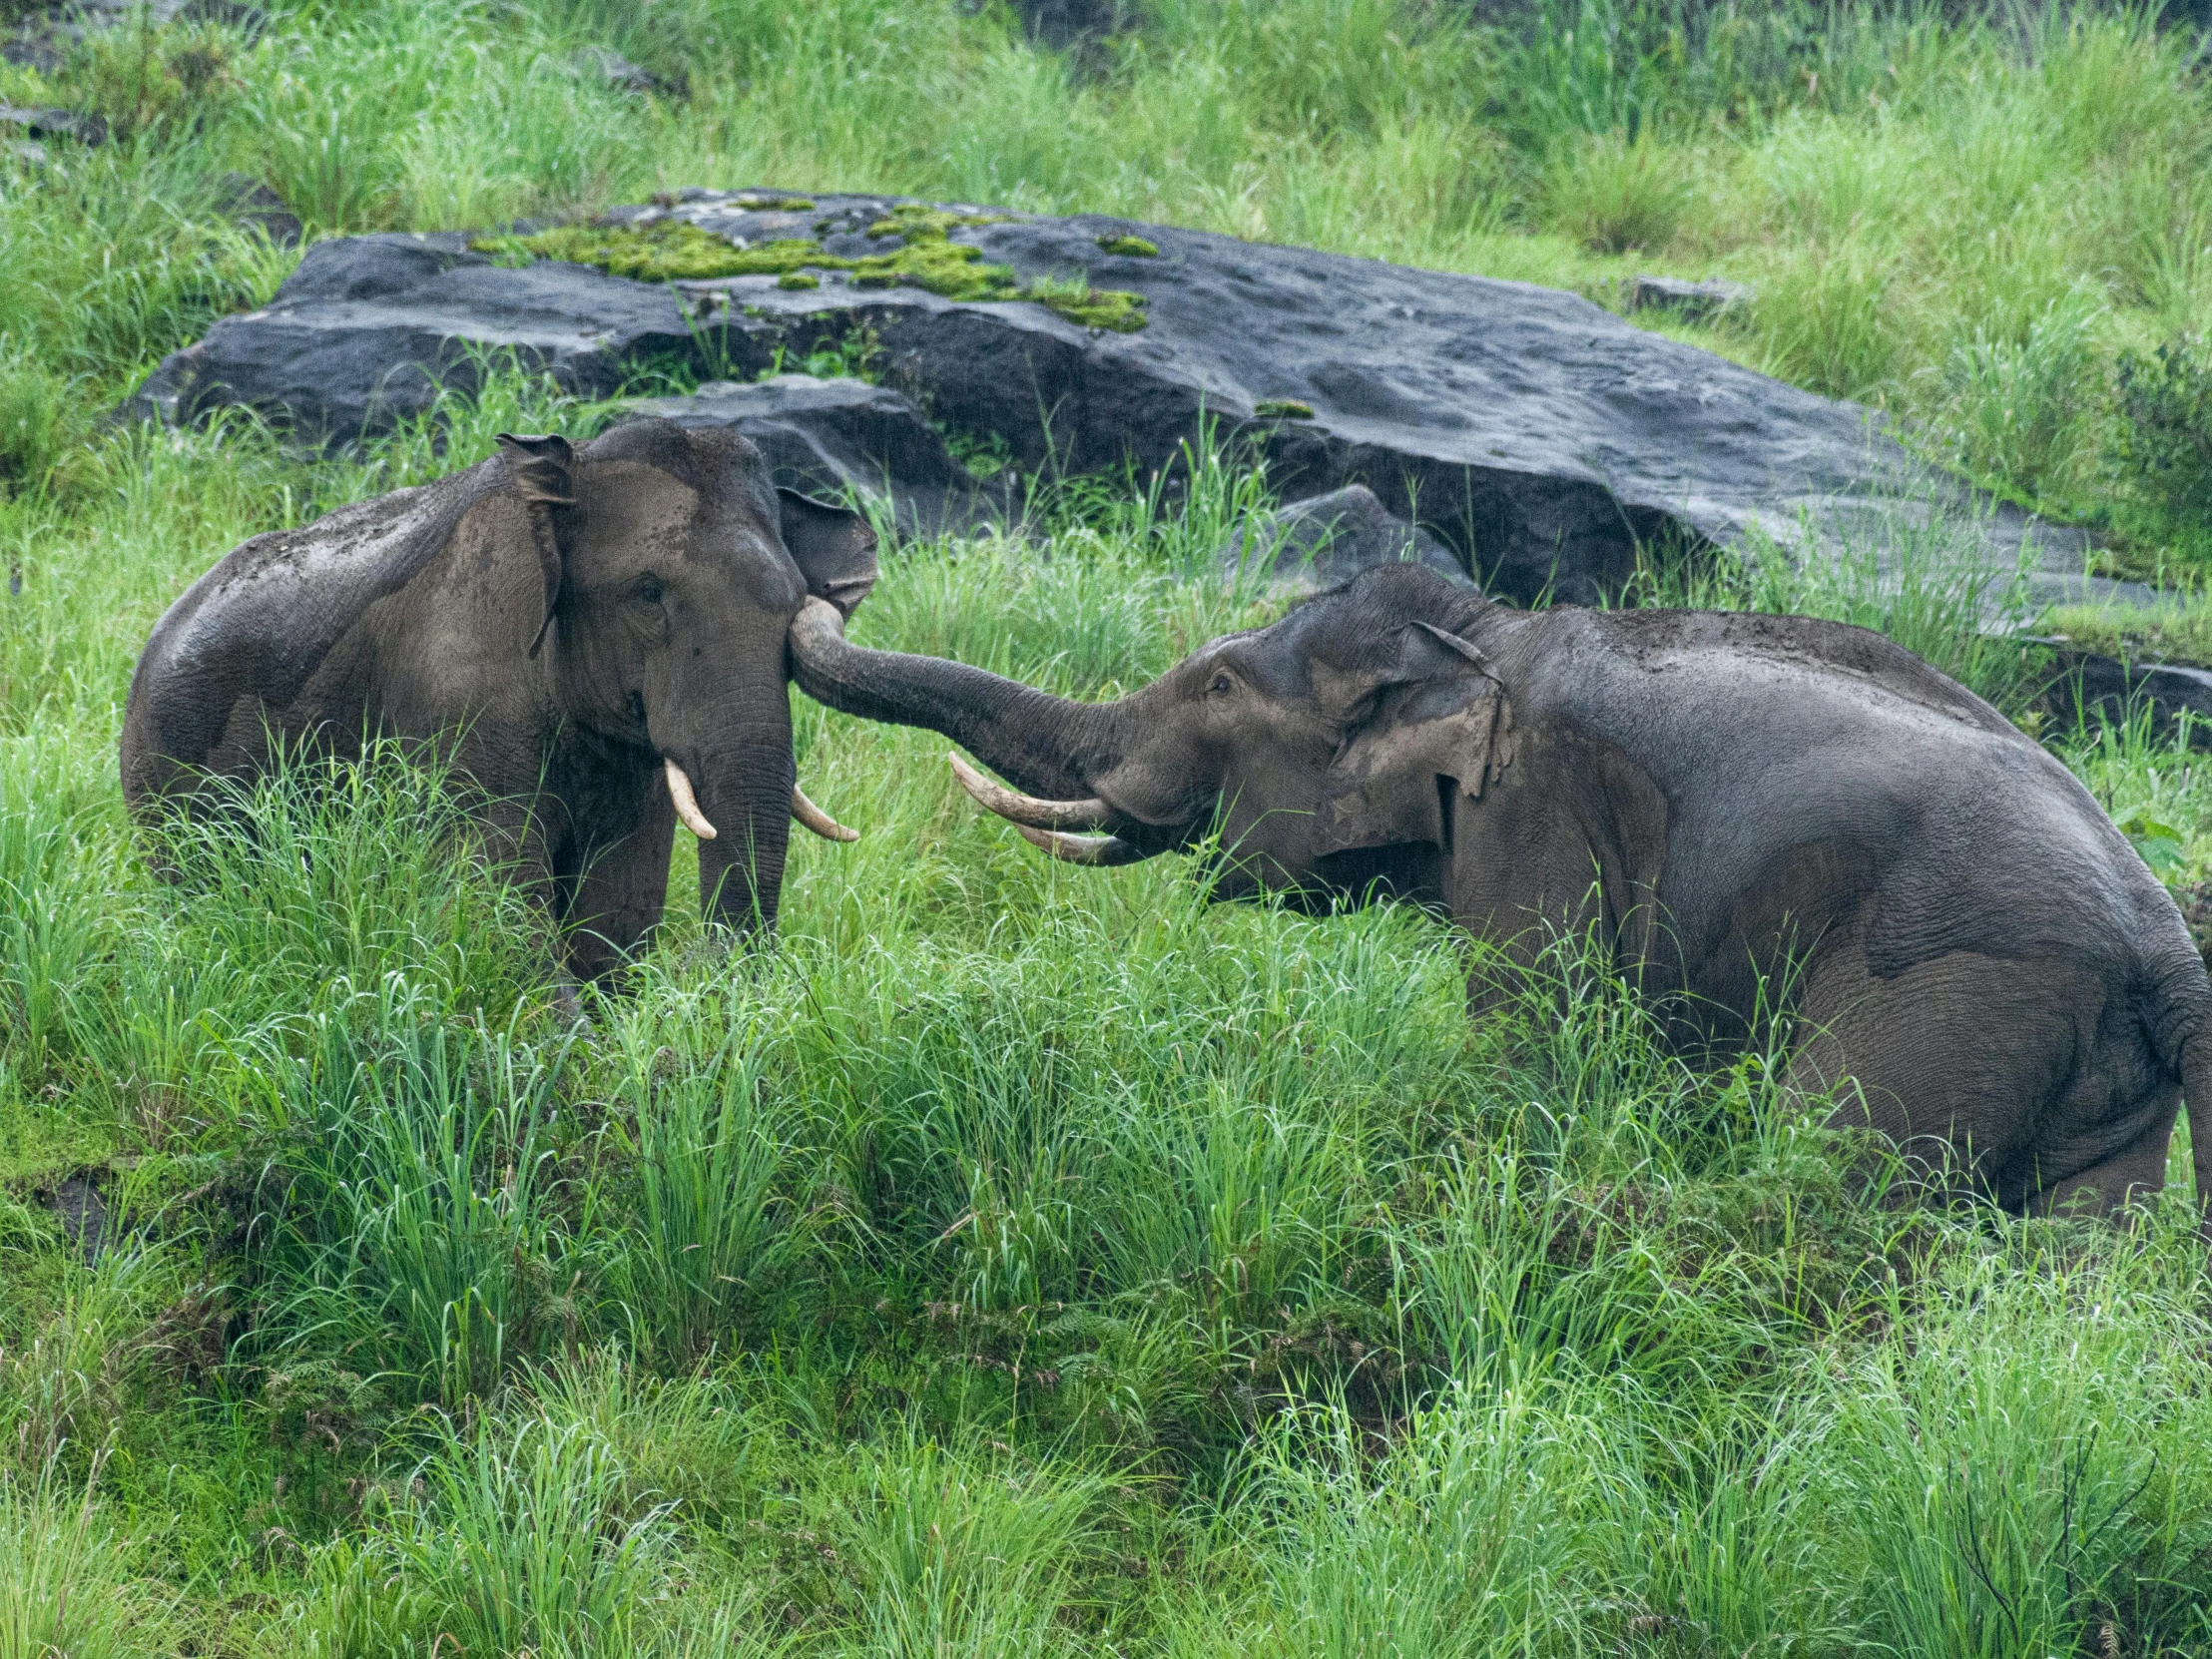 two elephants in a field touching their trunks